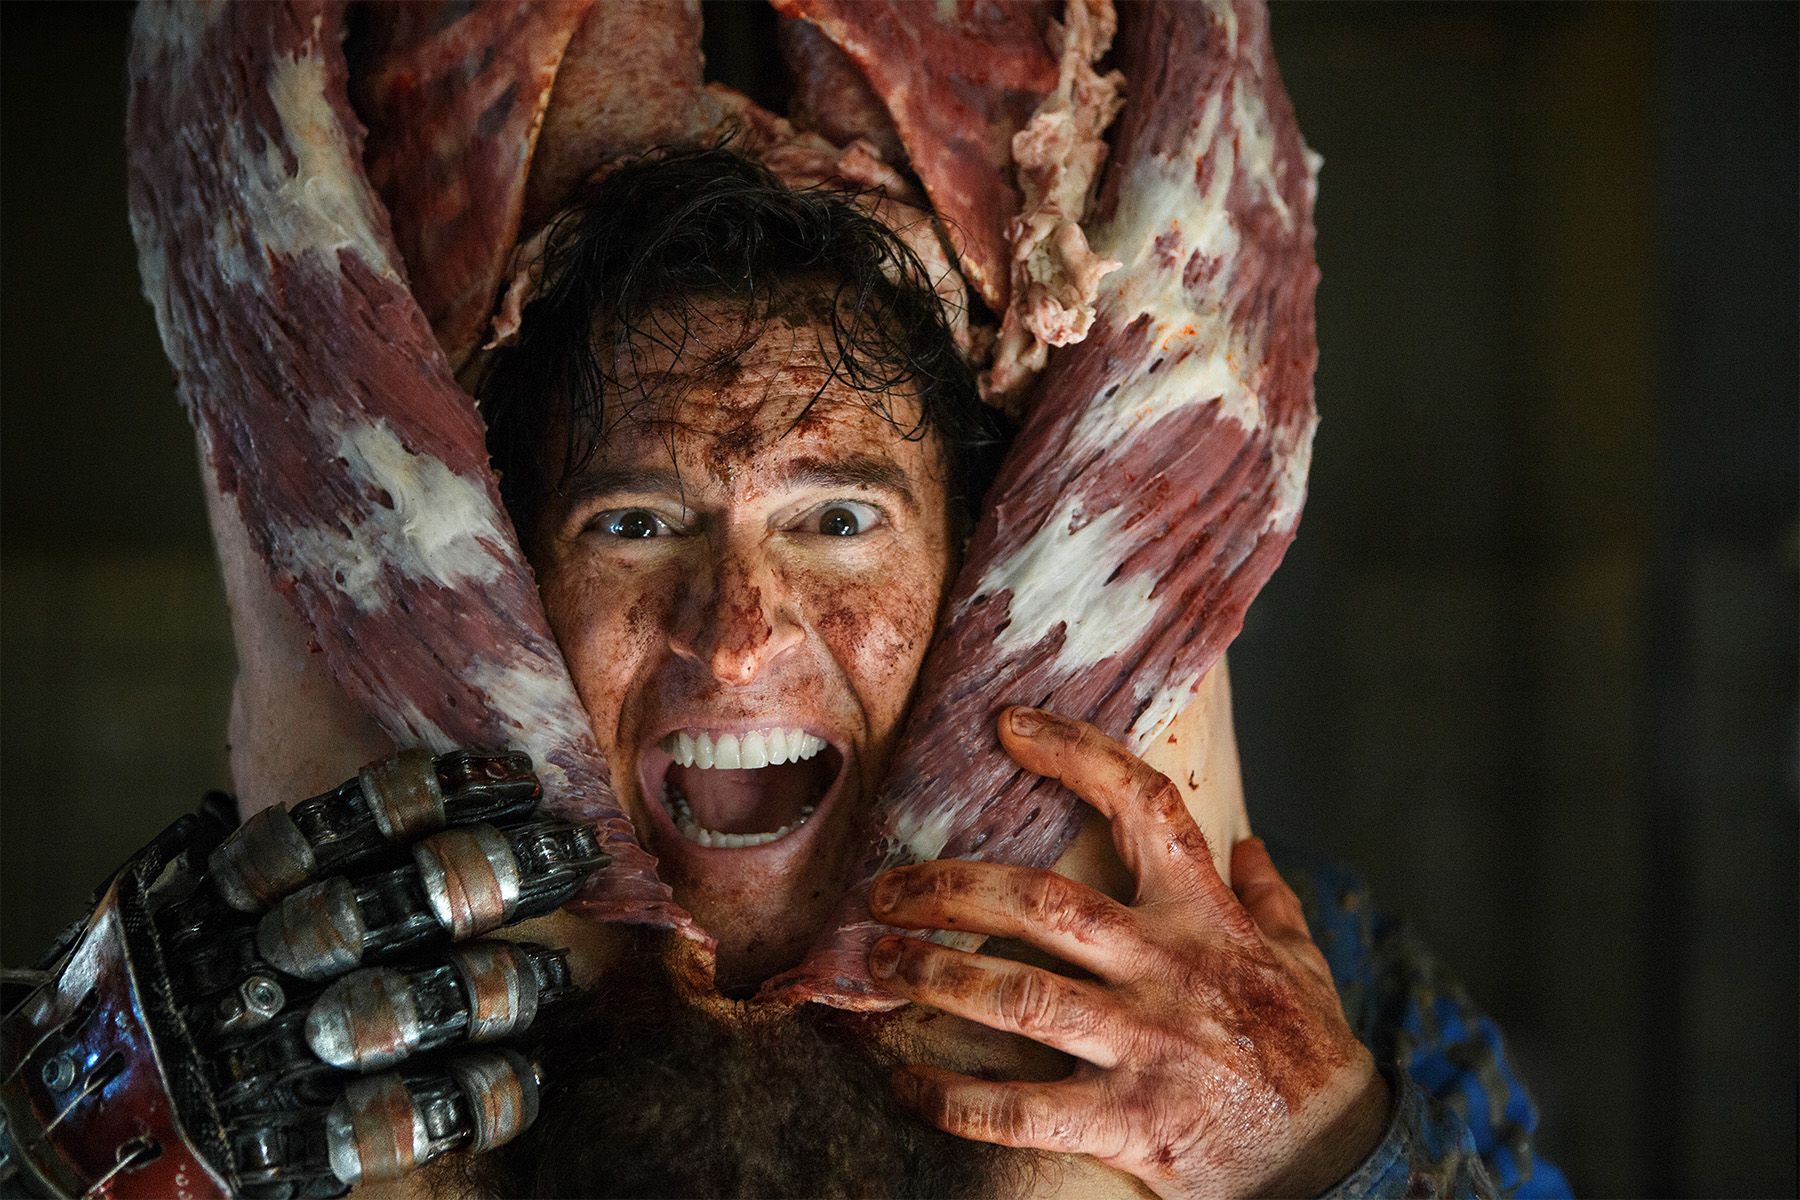 The 13 Most Awesomely Disgusting Ash Vs. Evil Dead Moments Over All Three Seasons